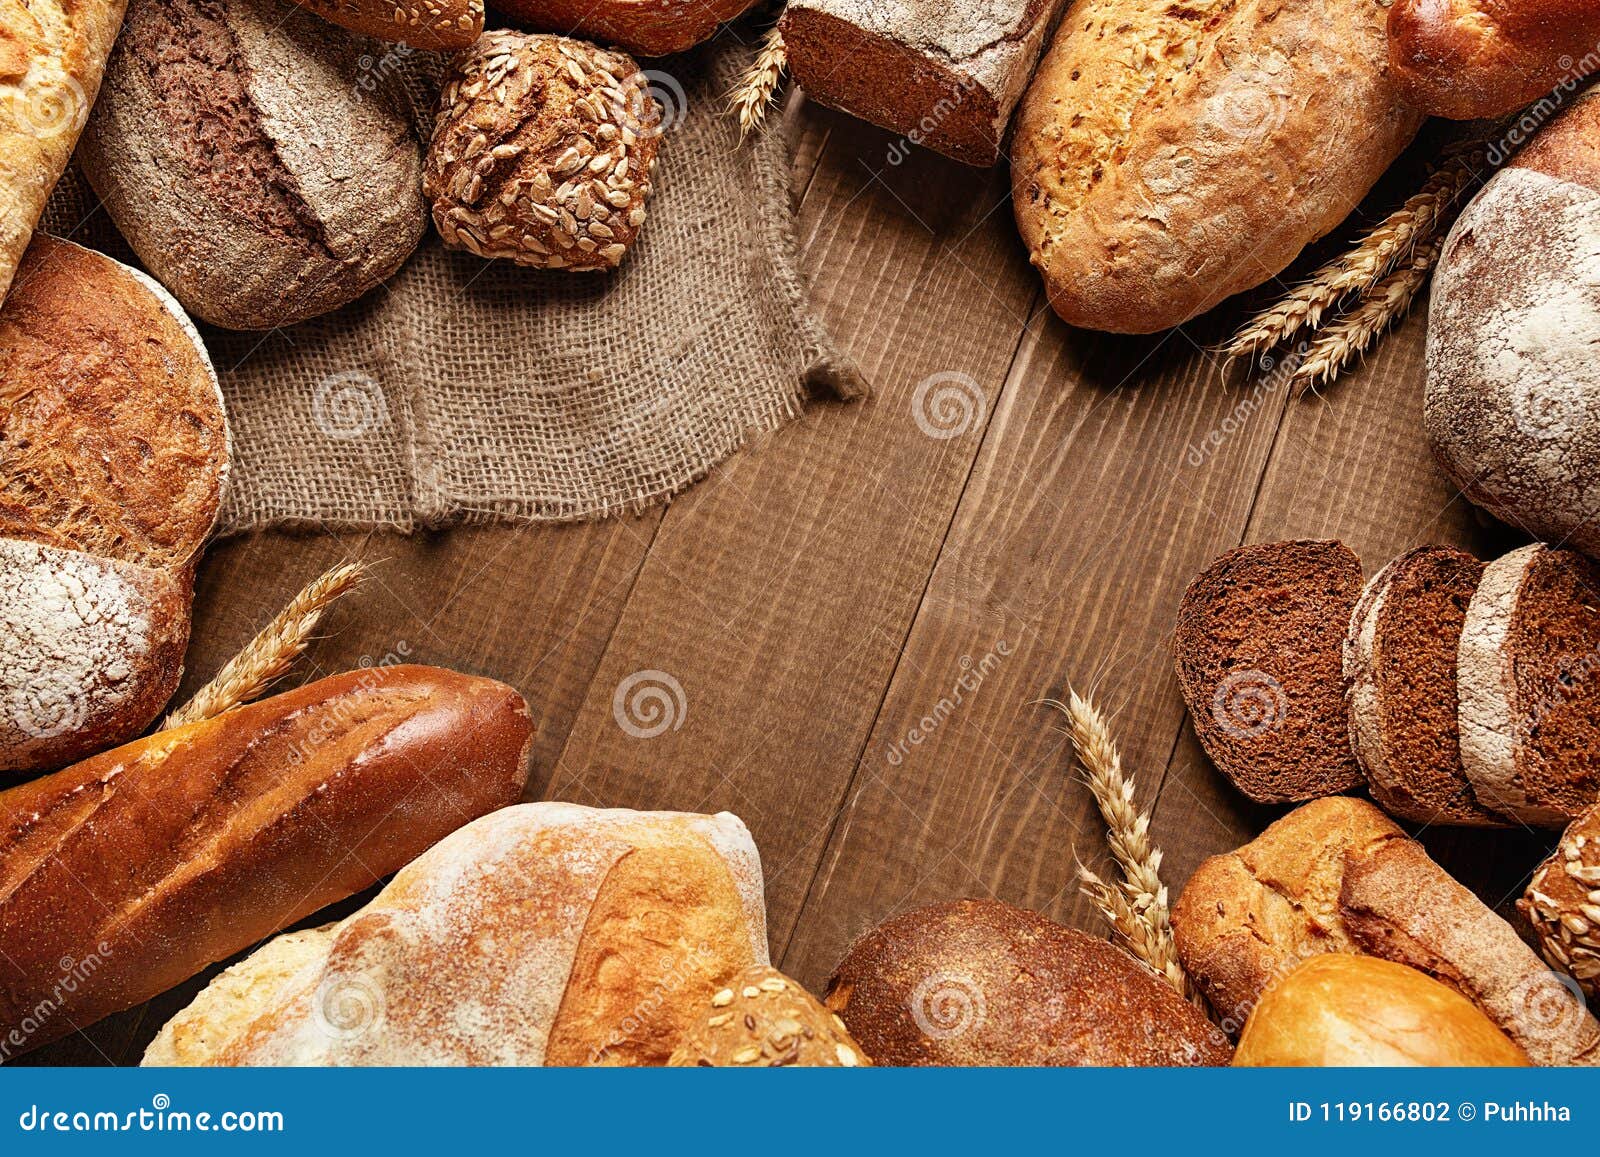 food. bread and bakery on wooden background